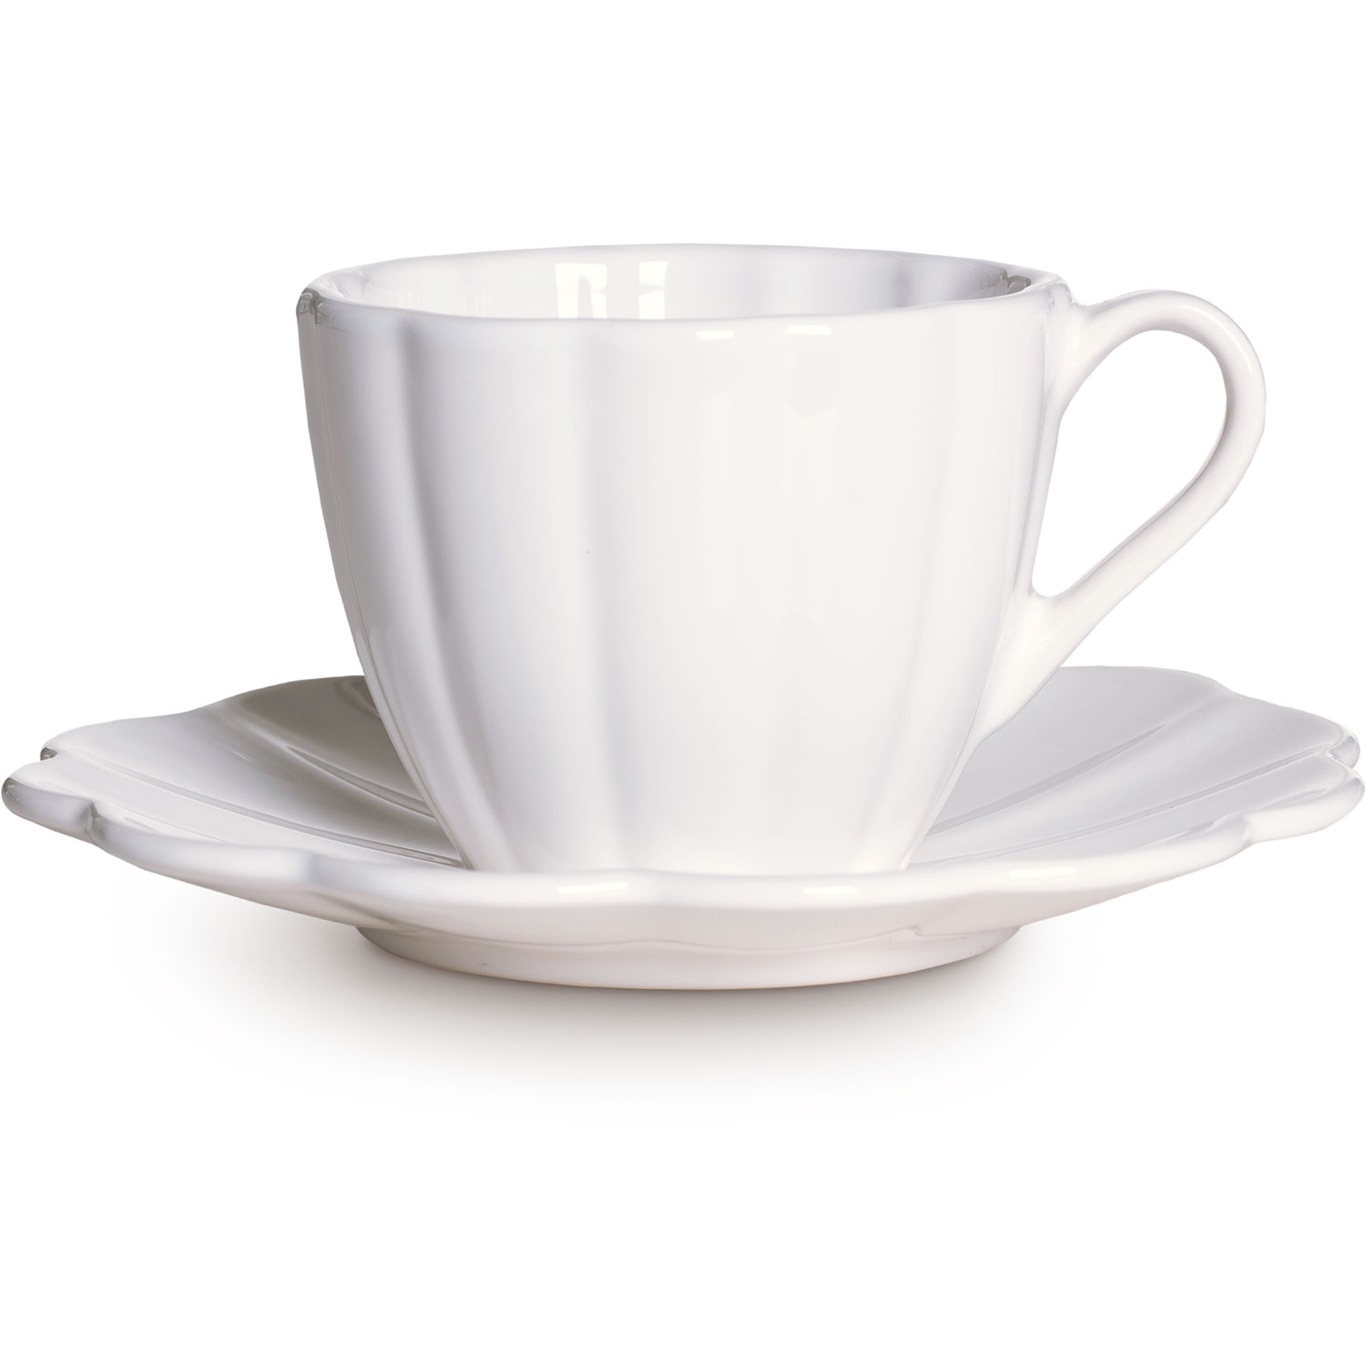 Oyster Cup With Saucer 25 cl, White